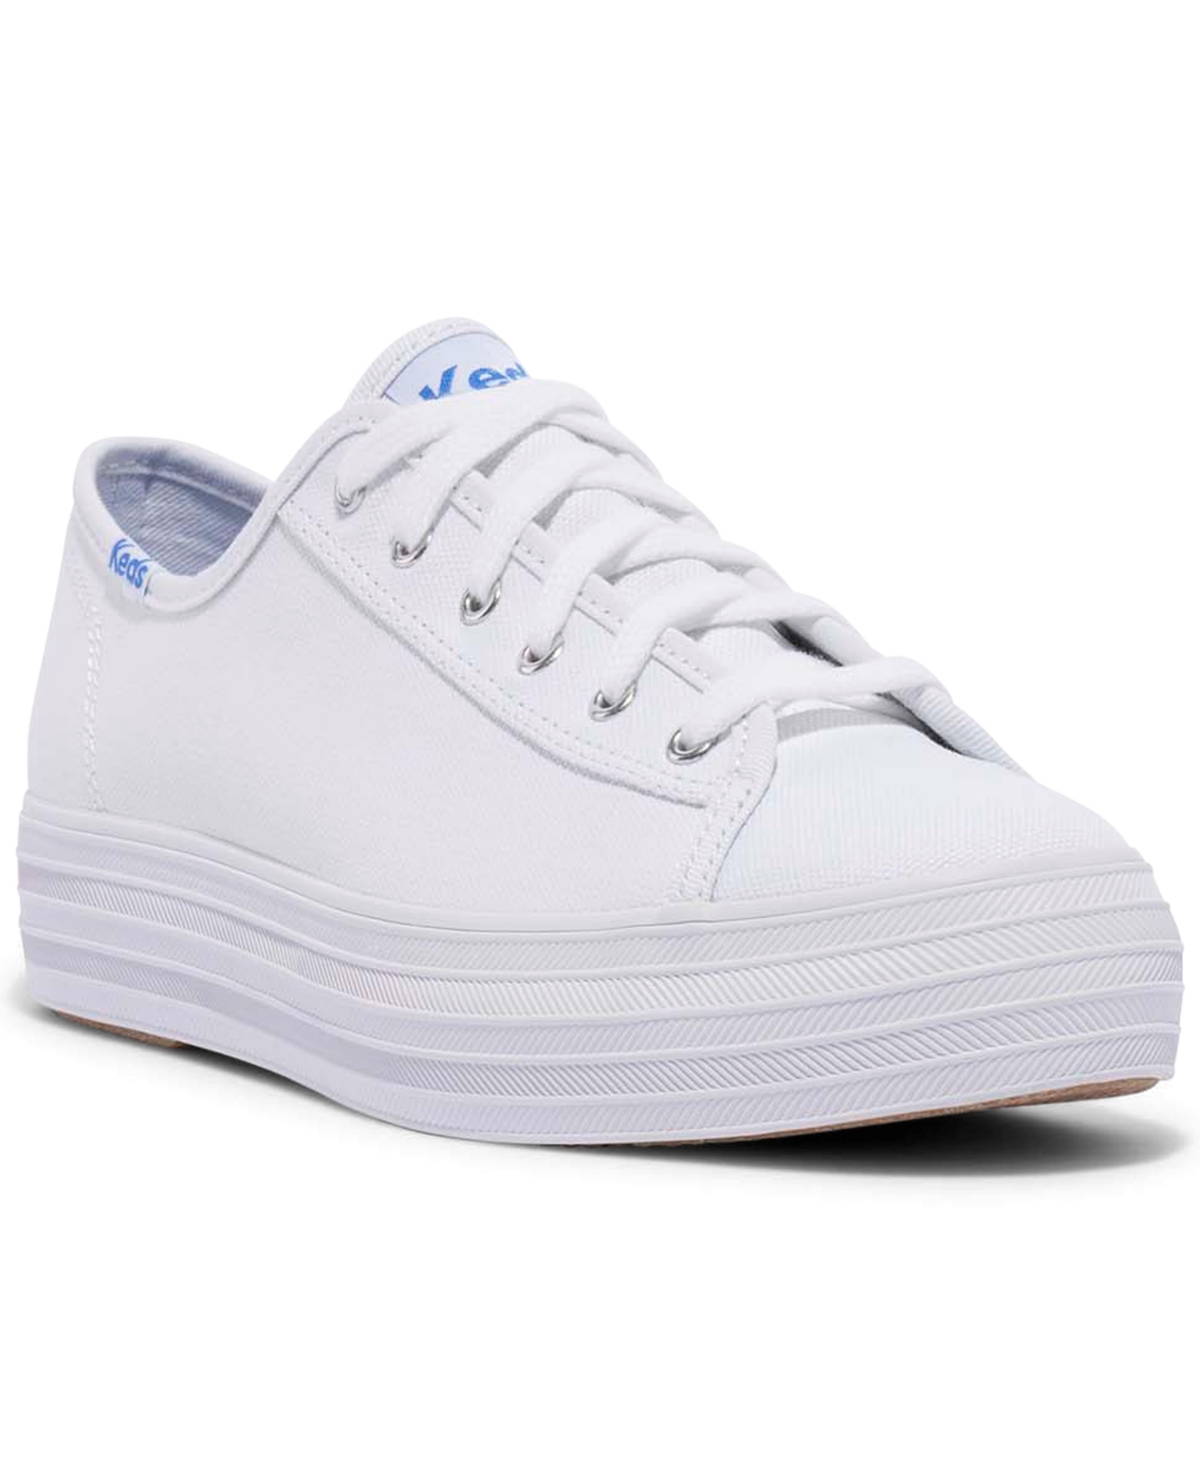 Women's Triple Kick Canvas Sneakers from Finish Line - White